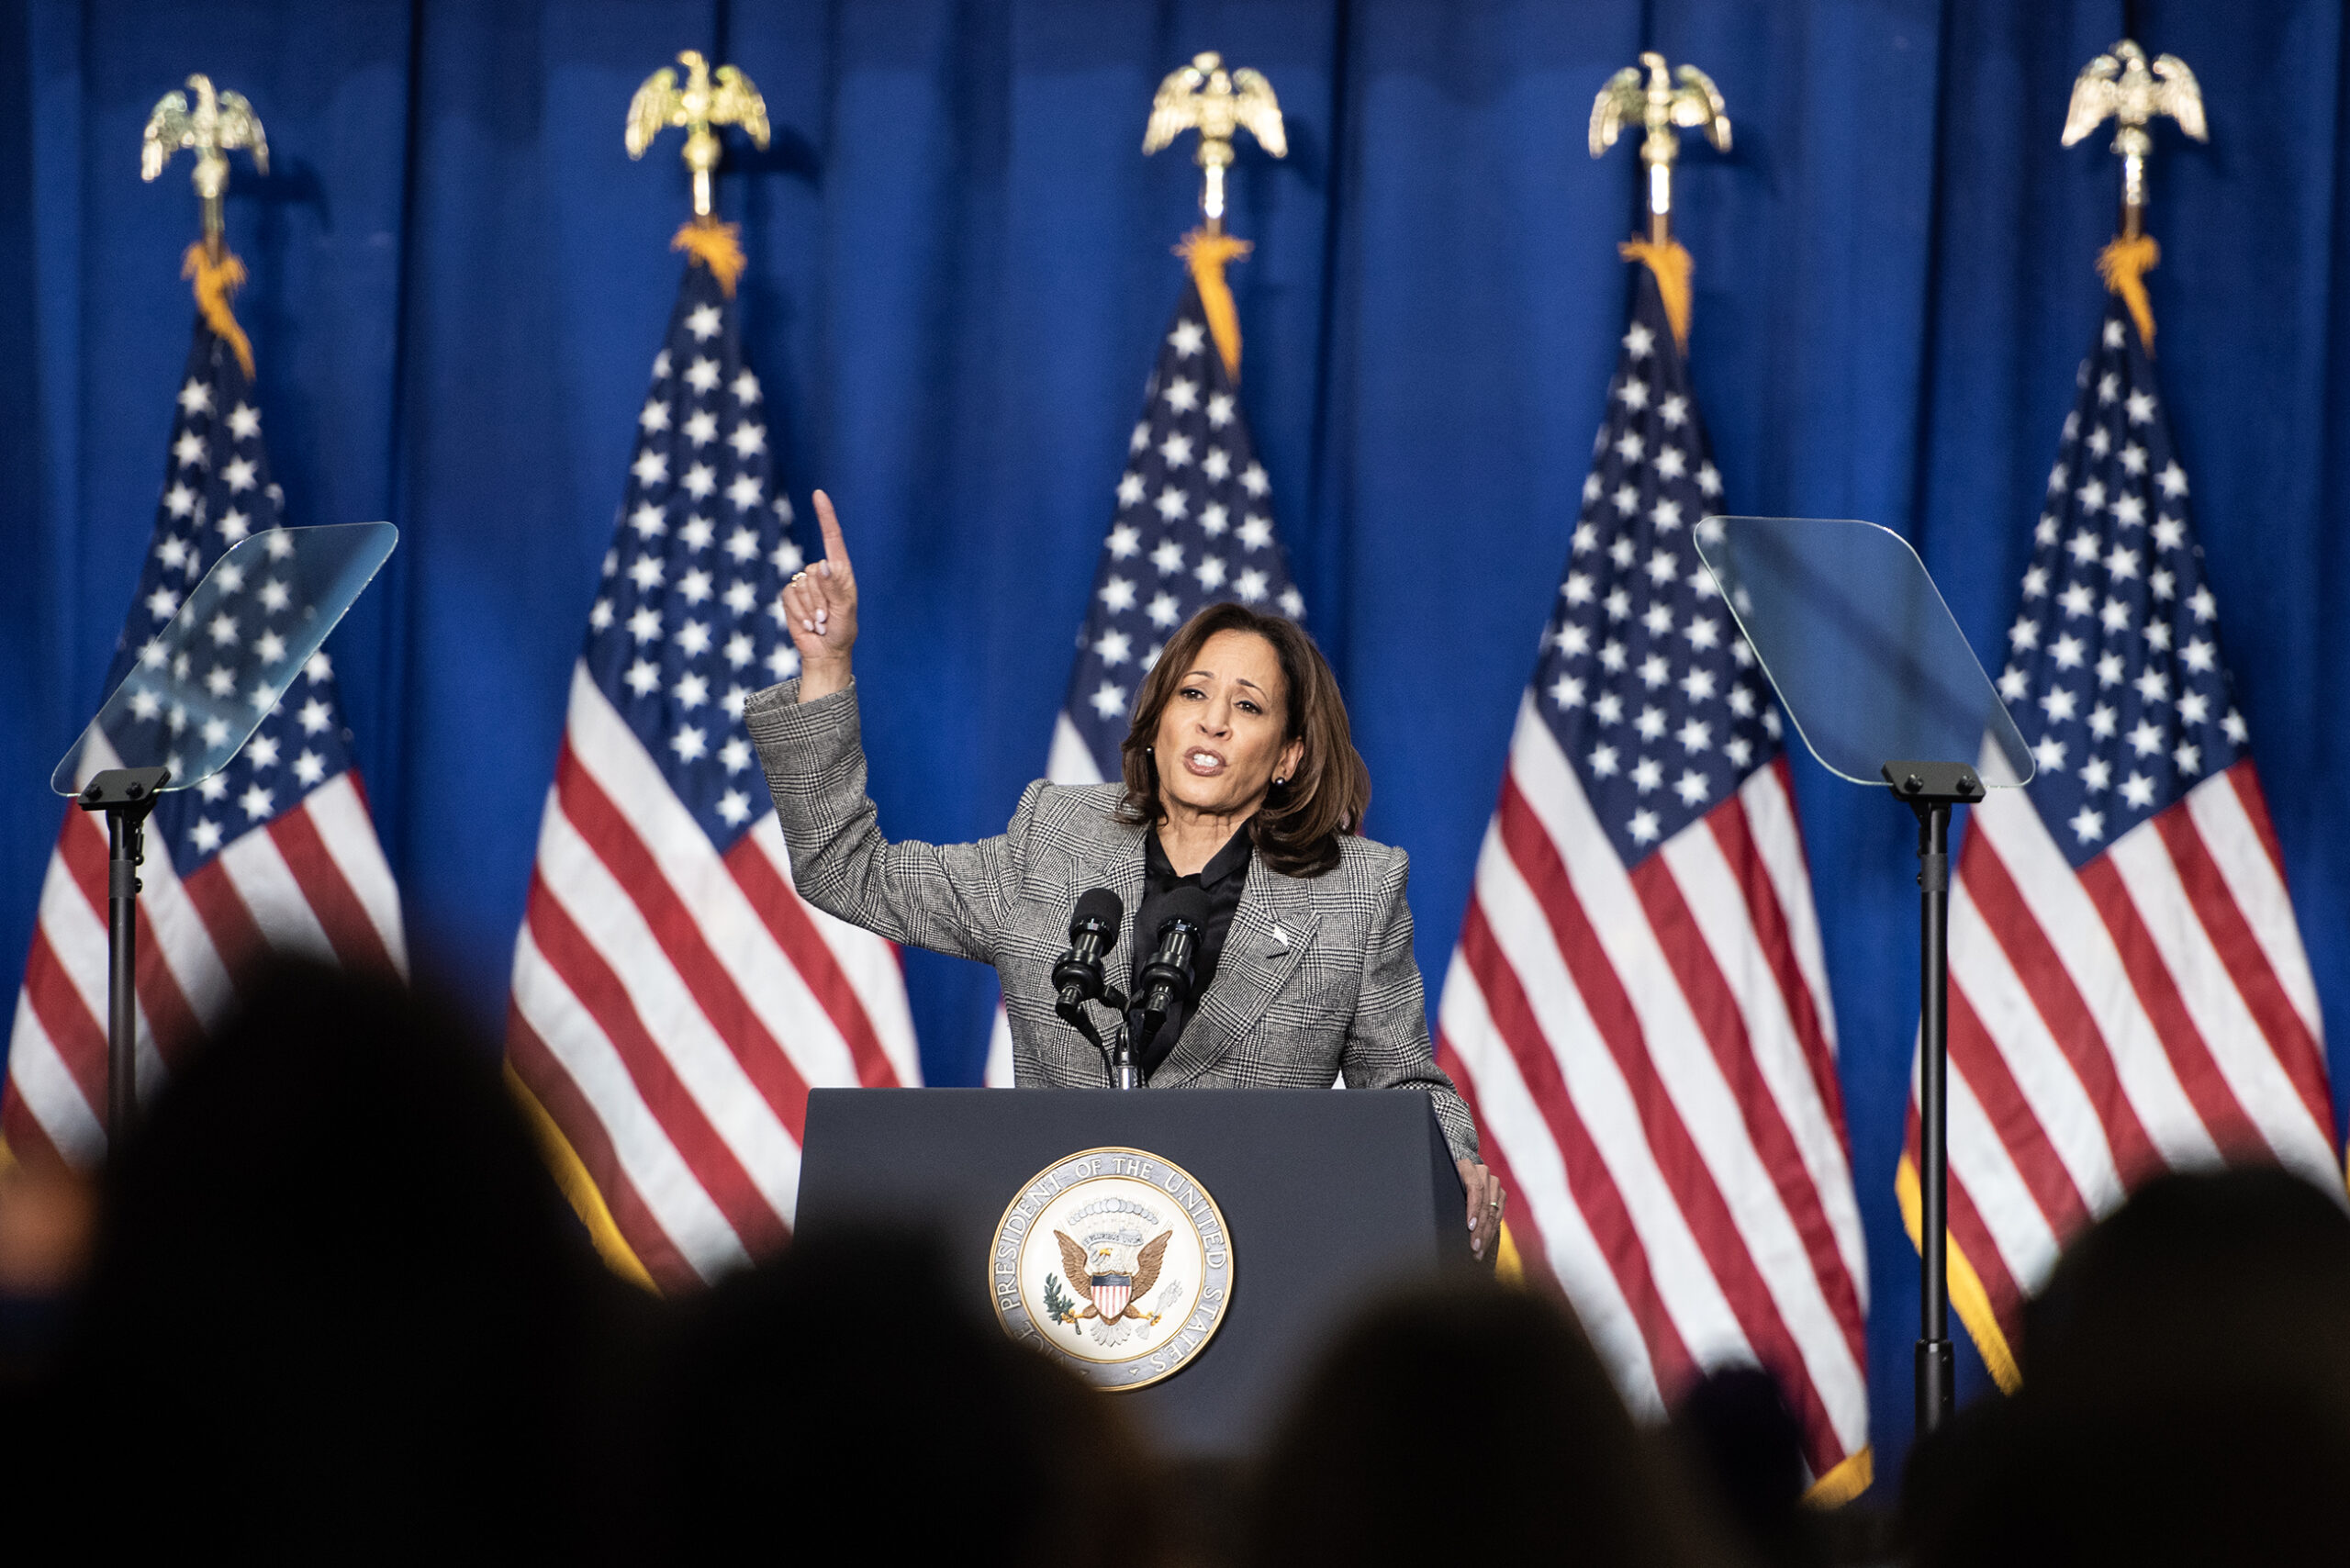 In an interview with WPR, Vice President Kamala Harris says Wisconsin is ‘ground zero’ for reproductive rights